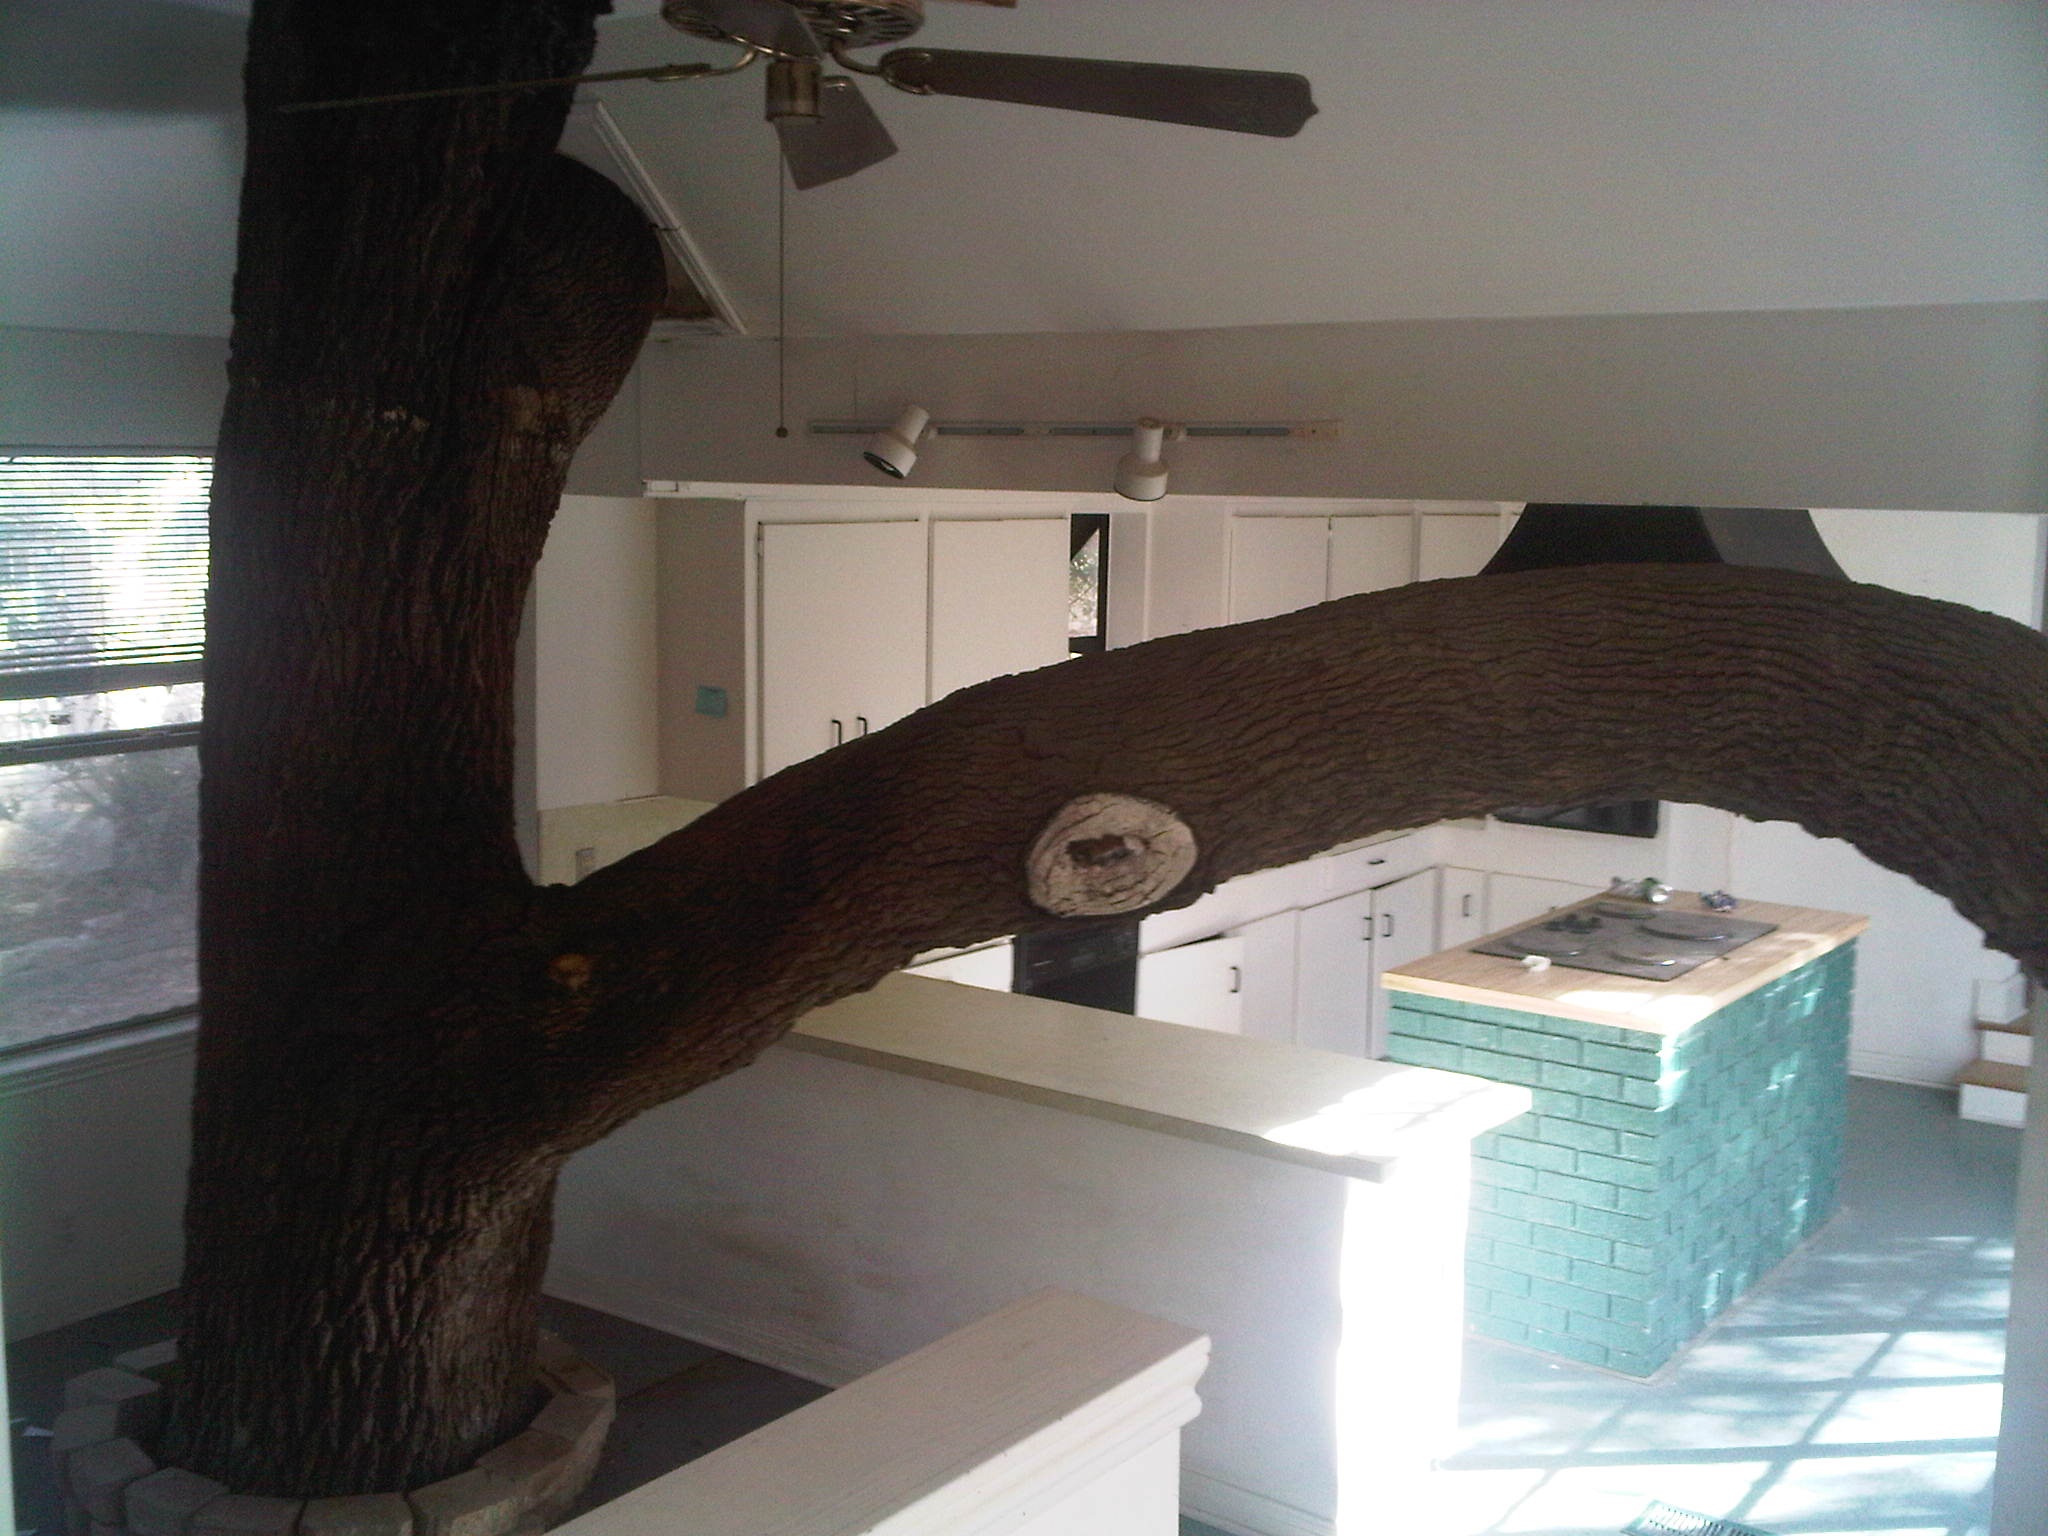 Yup, thats a tree in the house...